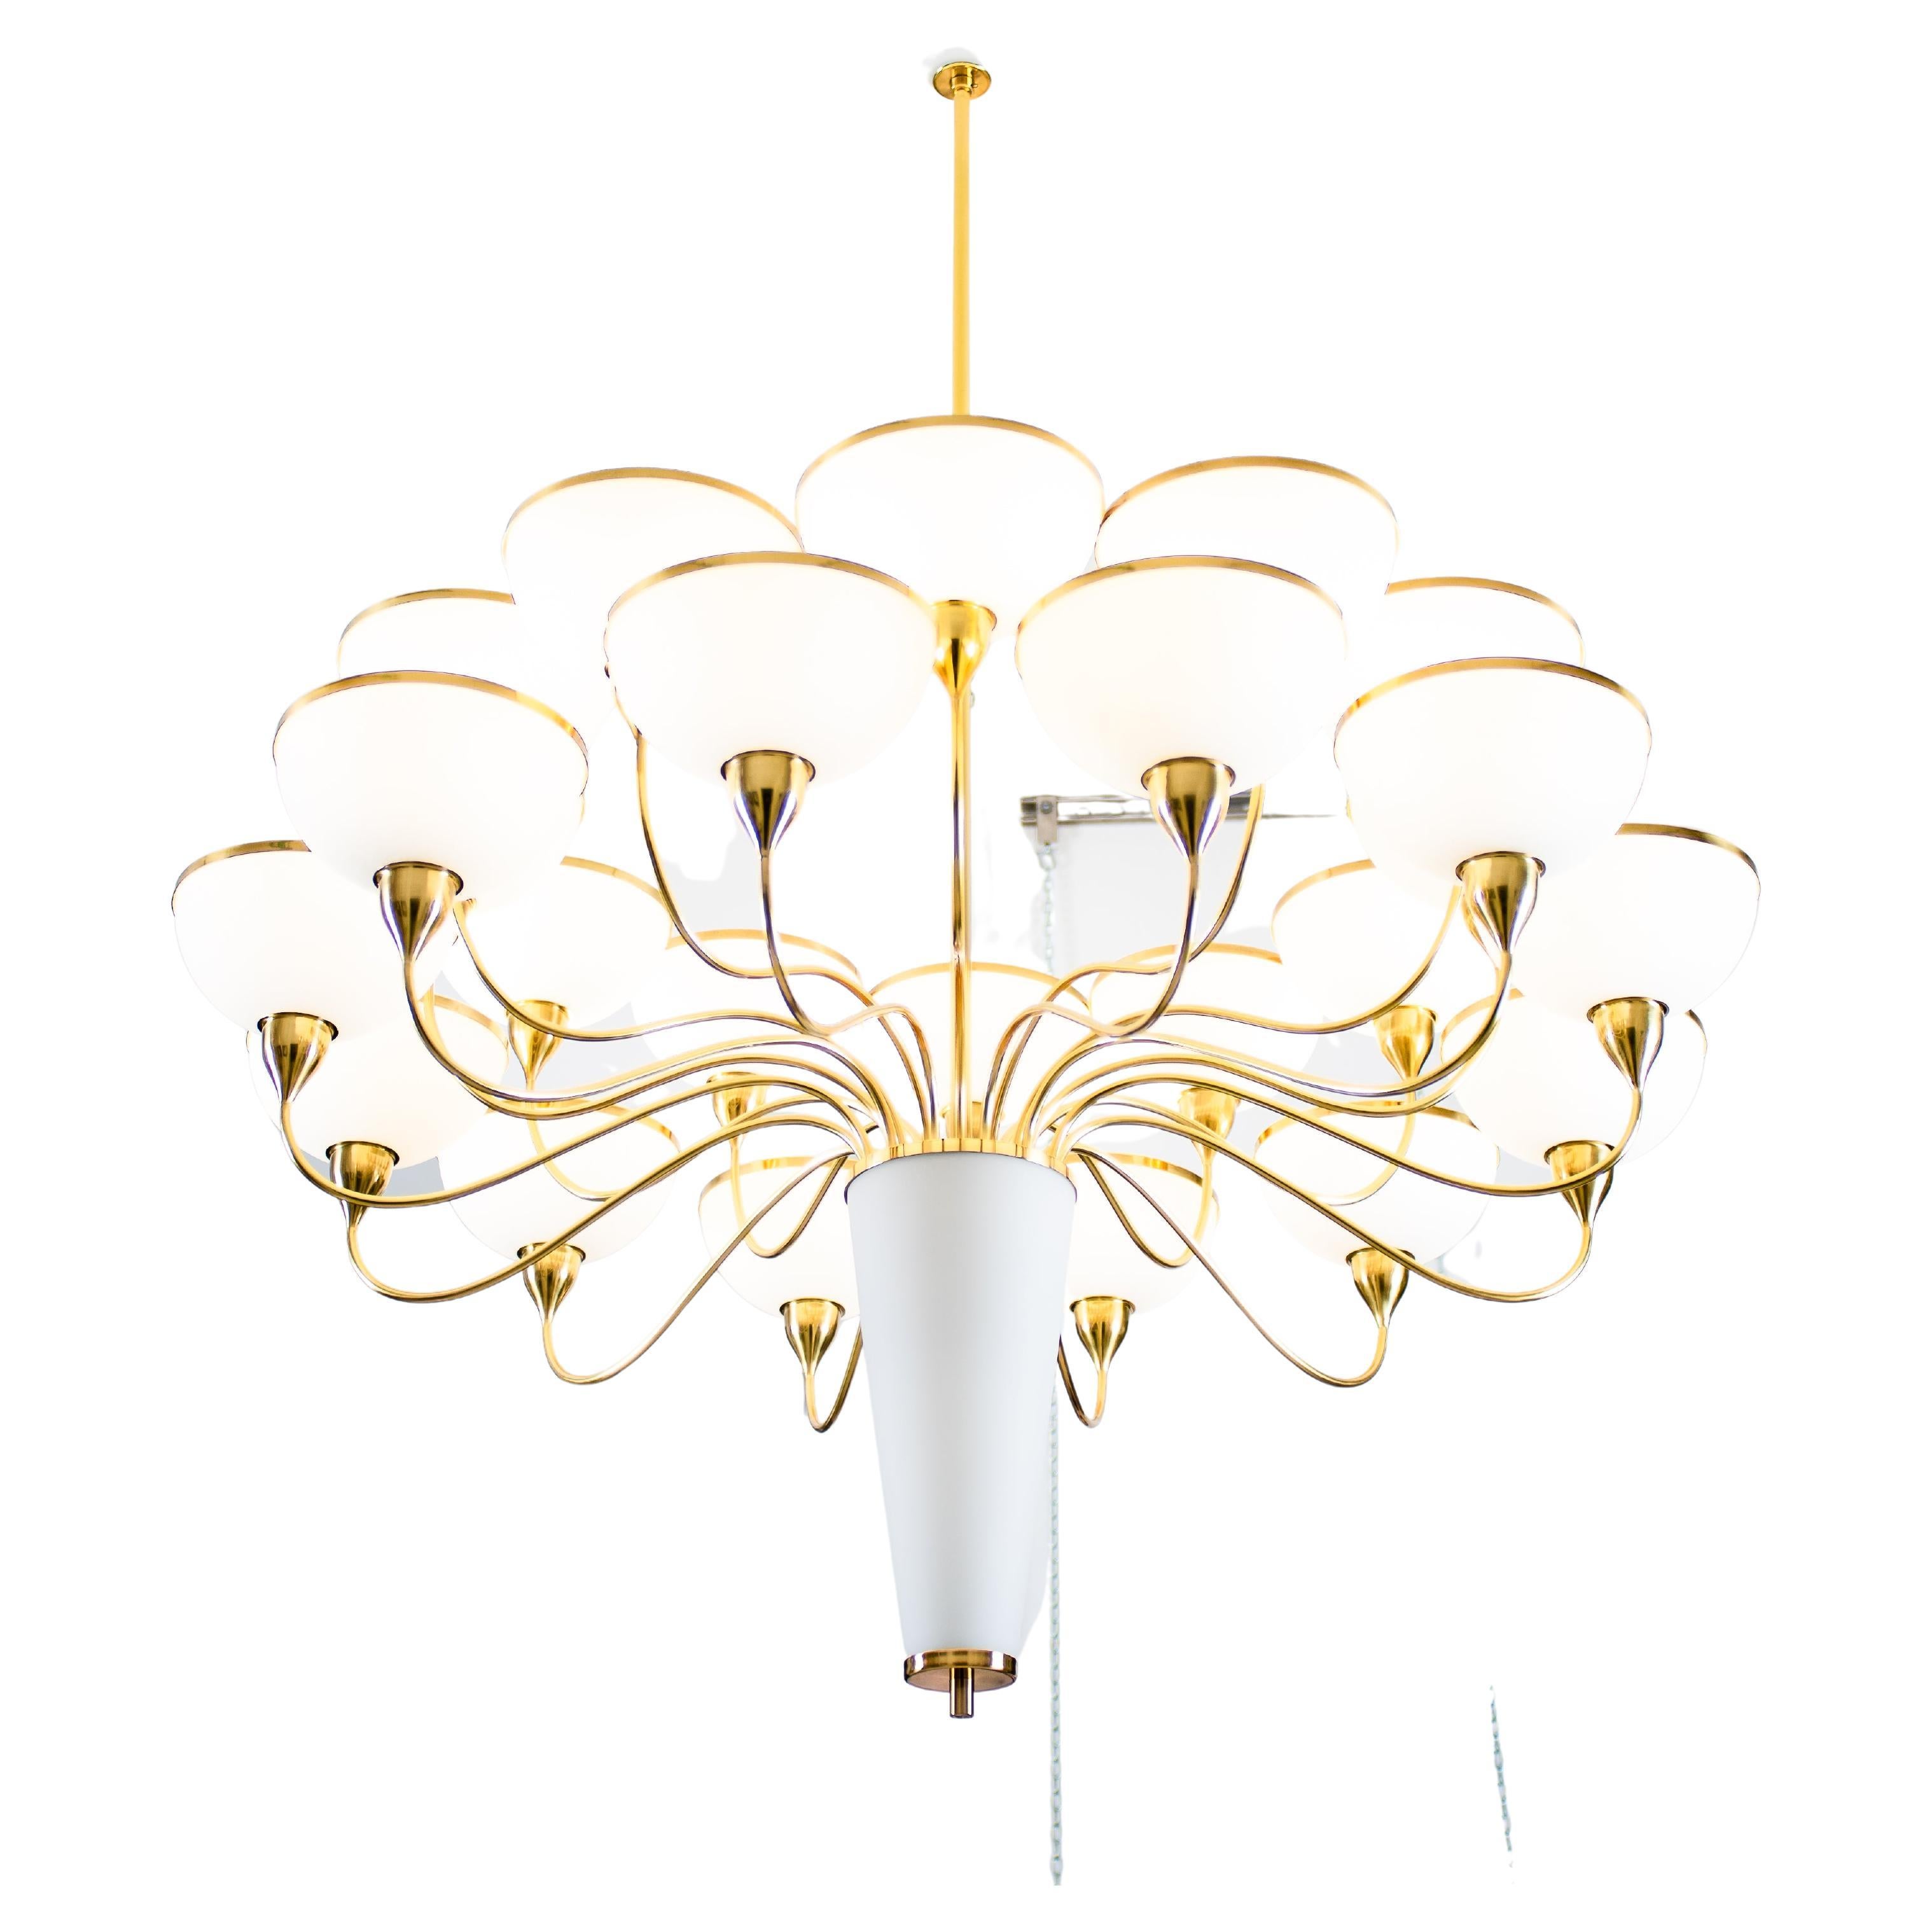 Large scenic chandelier called 